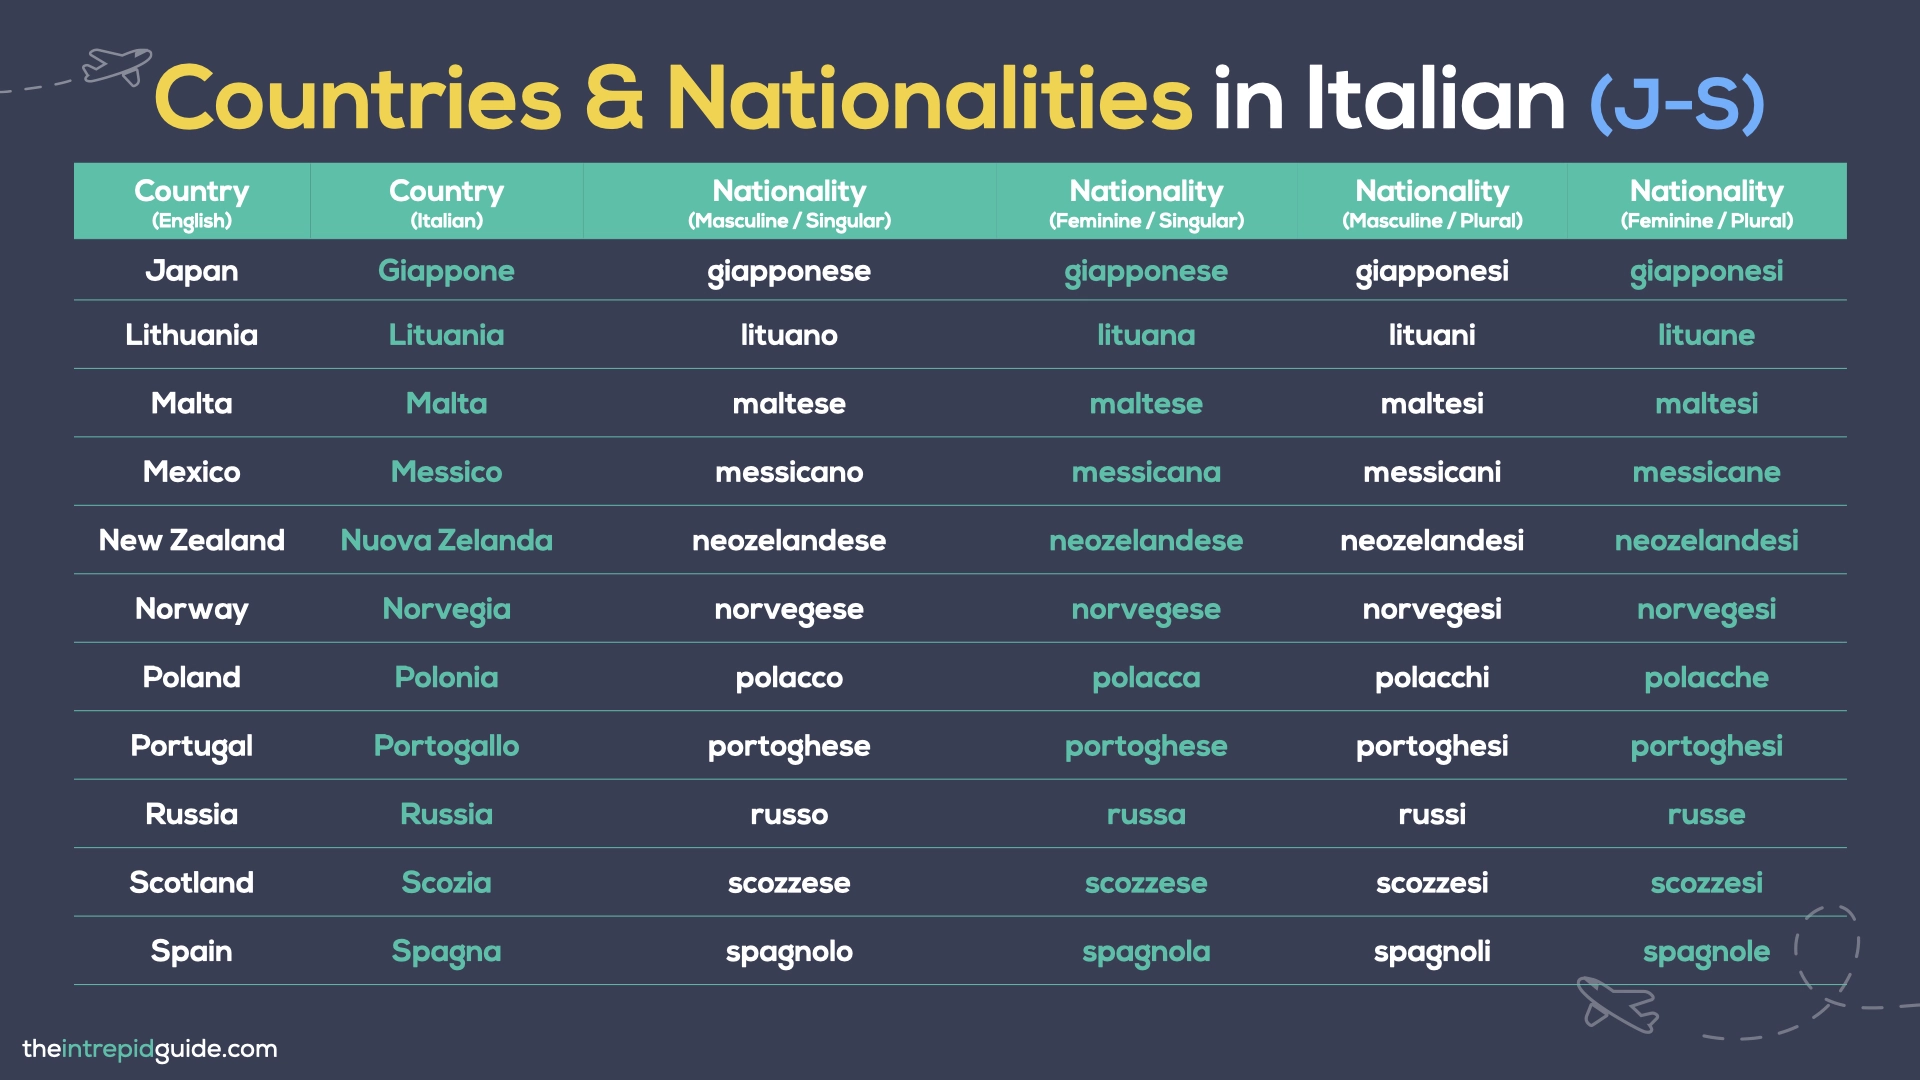 Countries and Nationalities in Italian - From J-S